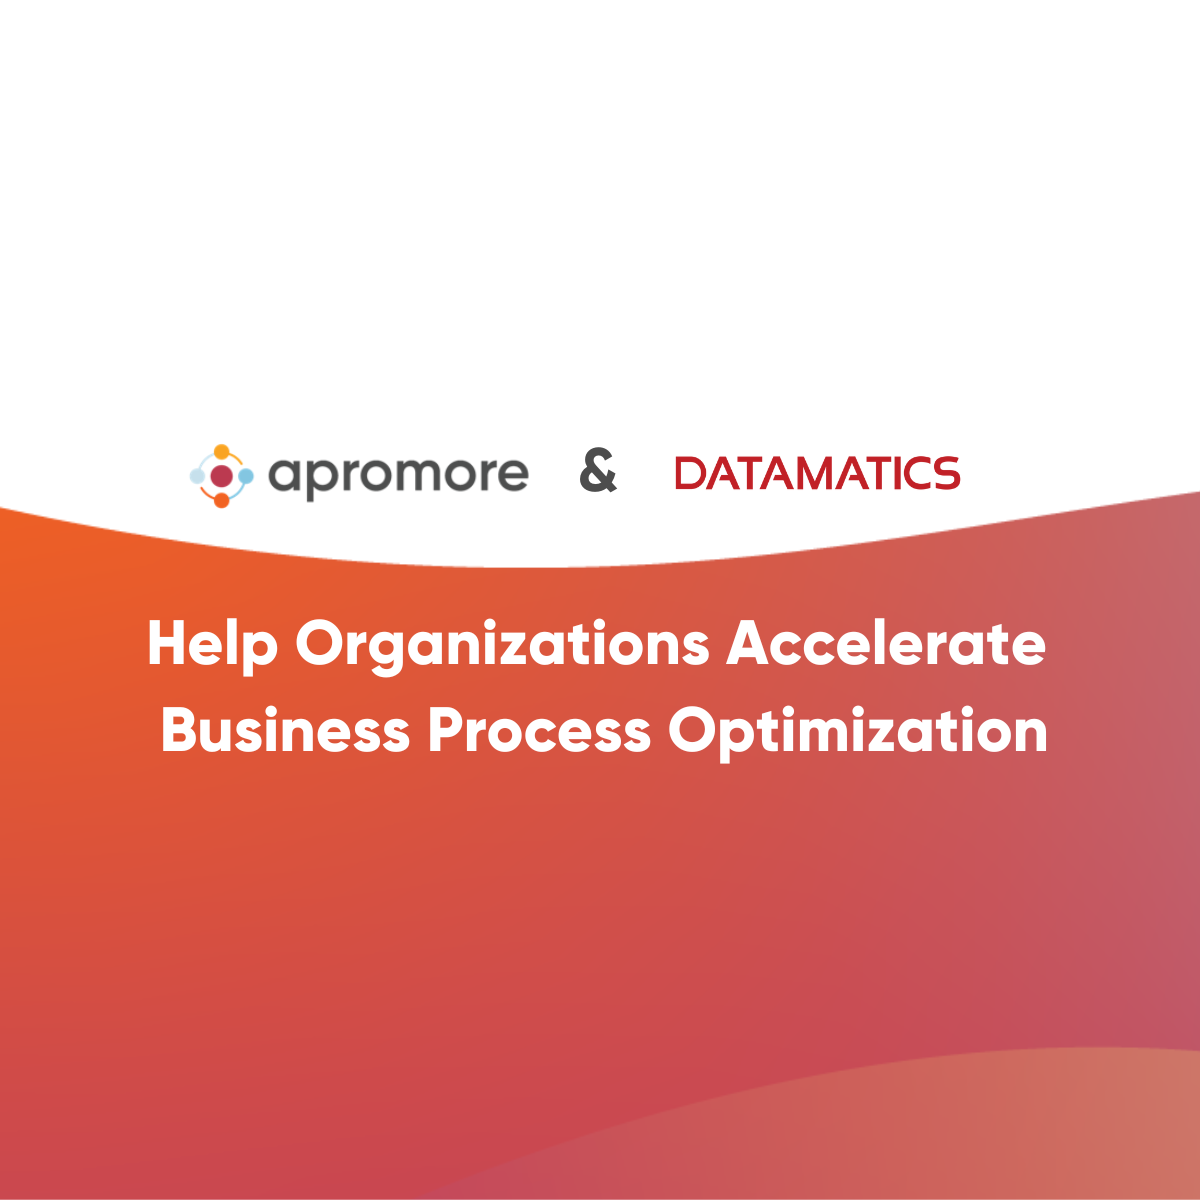 Apromore and Datamatics Partner to Accelerate Business Process Optimization